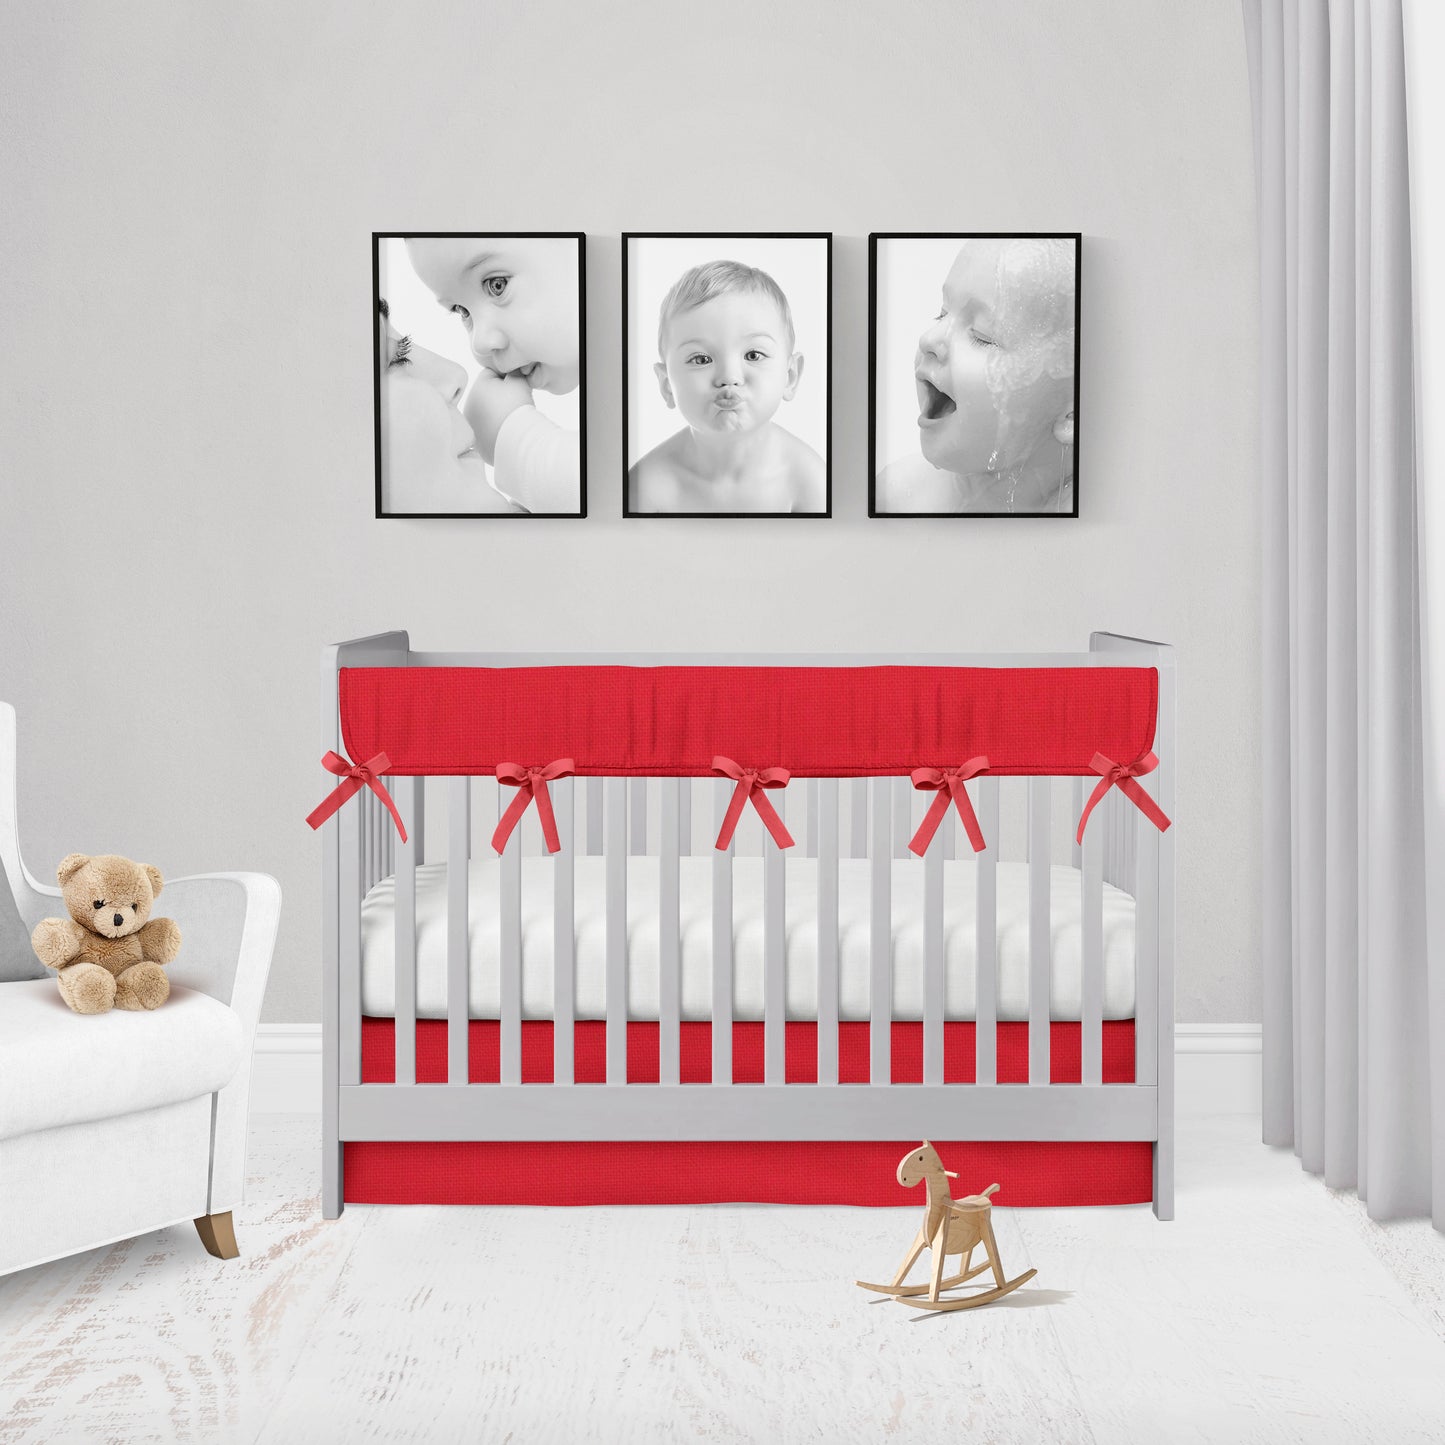 red crib rail cover & crib skirt shown in the flat option